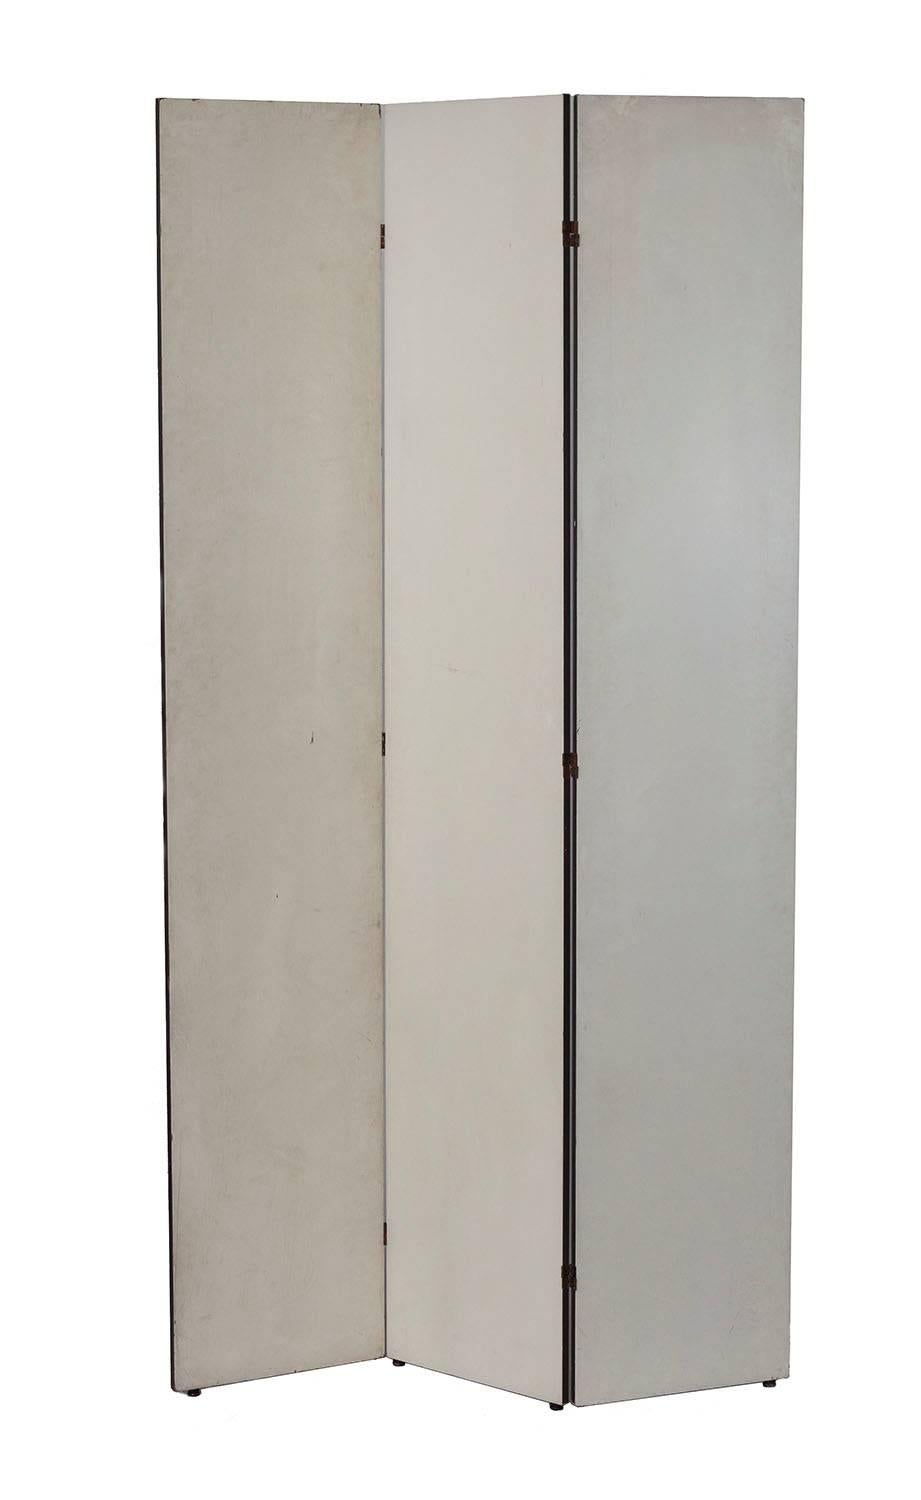 A unique folding screen by Tommi Parzinger with three painted panels in taupe, grey, and off-white, made specifically for his personal office.

Tommi Parzinger (1903-1981) was a German furniture designer and painter. Born in Munich, he later moved